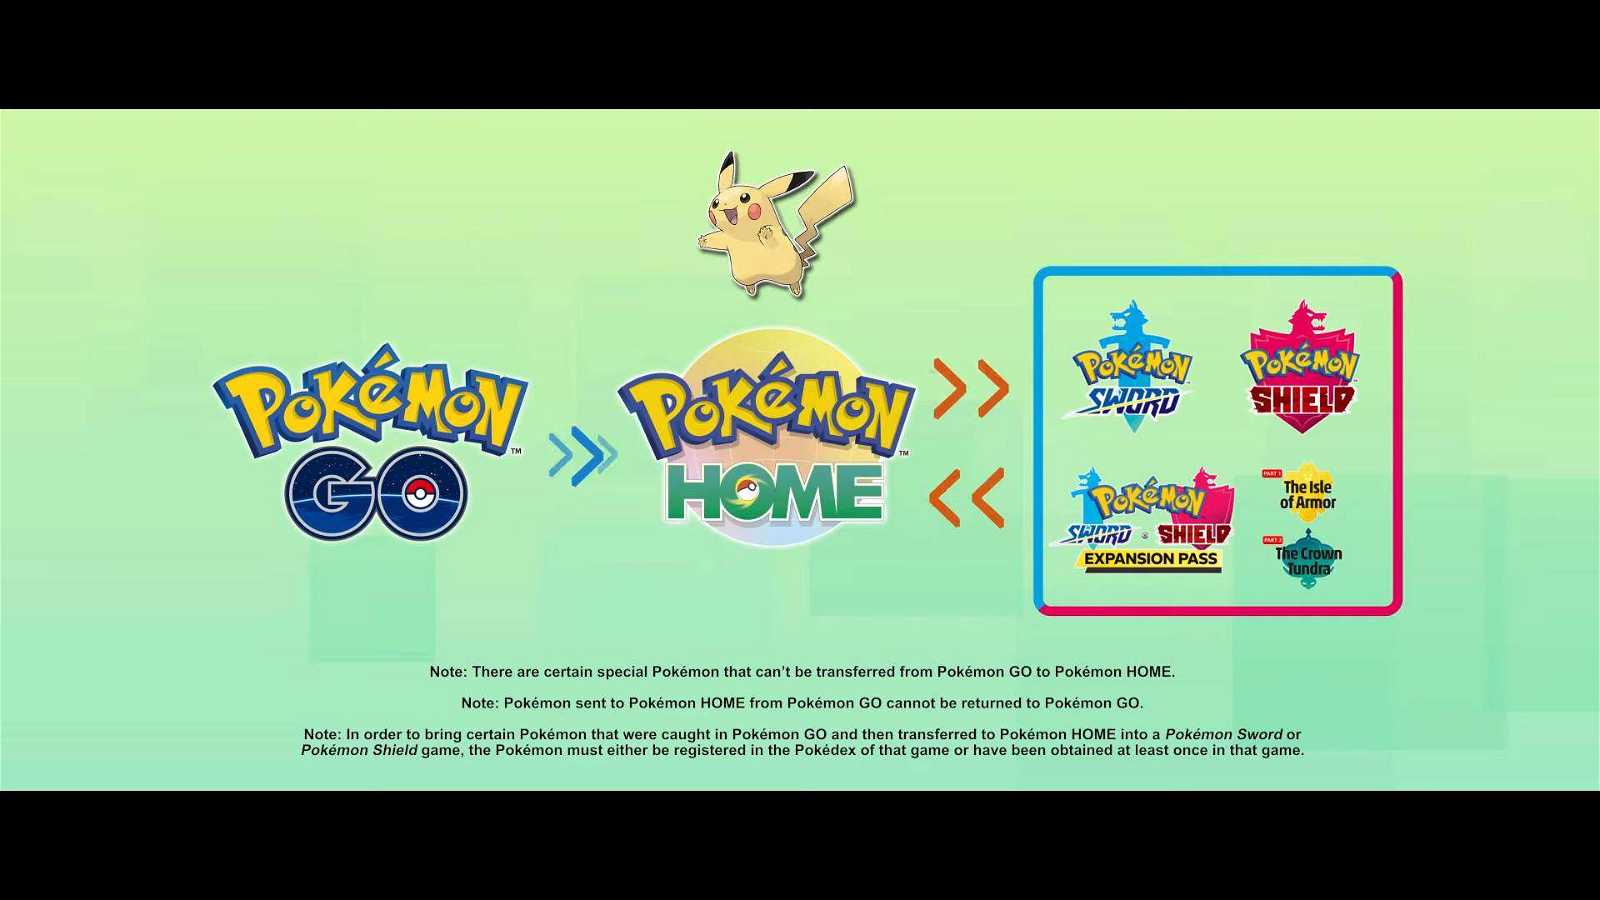 Pokemon Go is Now Compatible With Pokemon Home, But the Restrictions ...